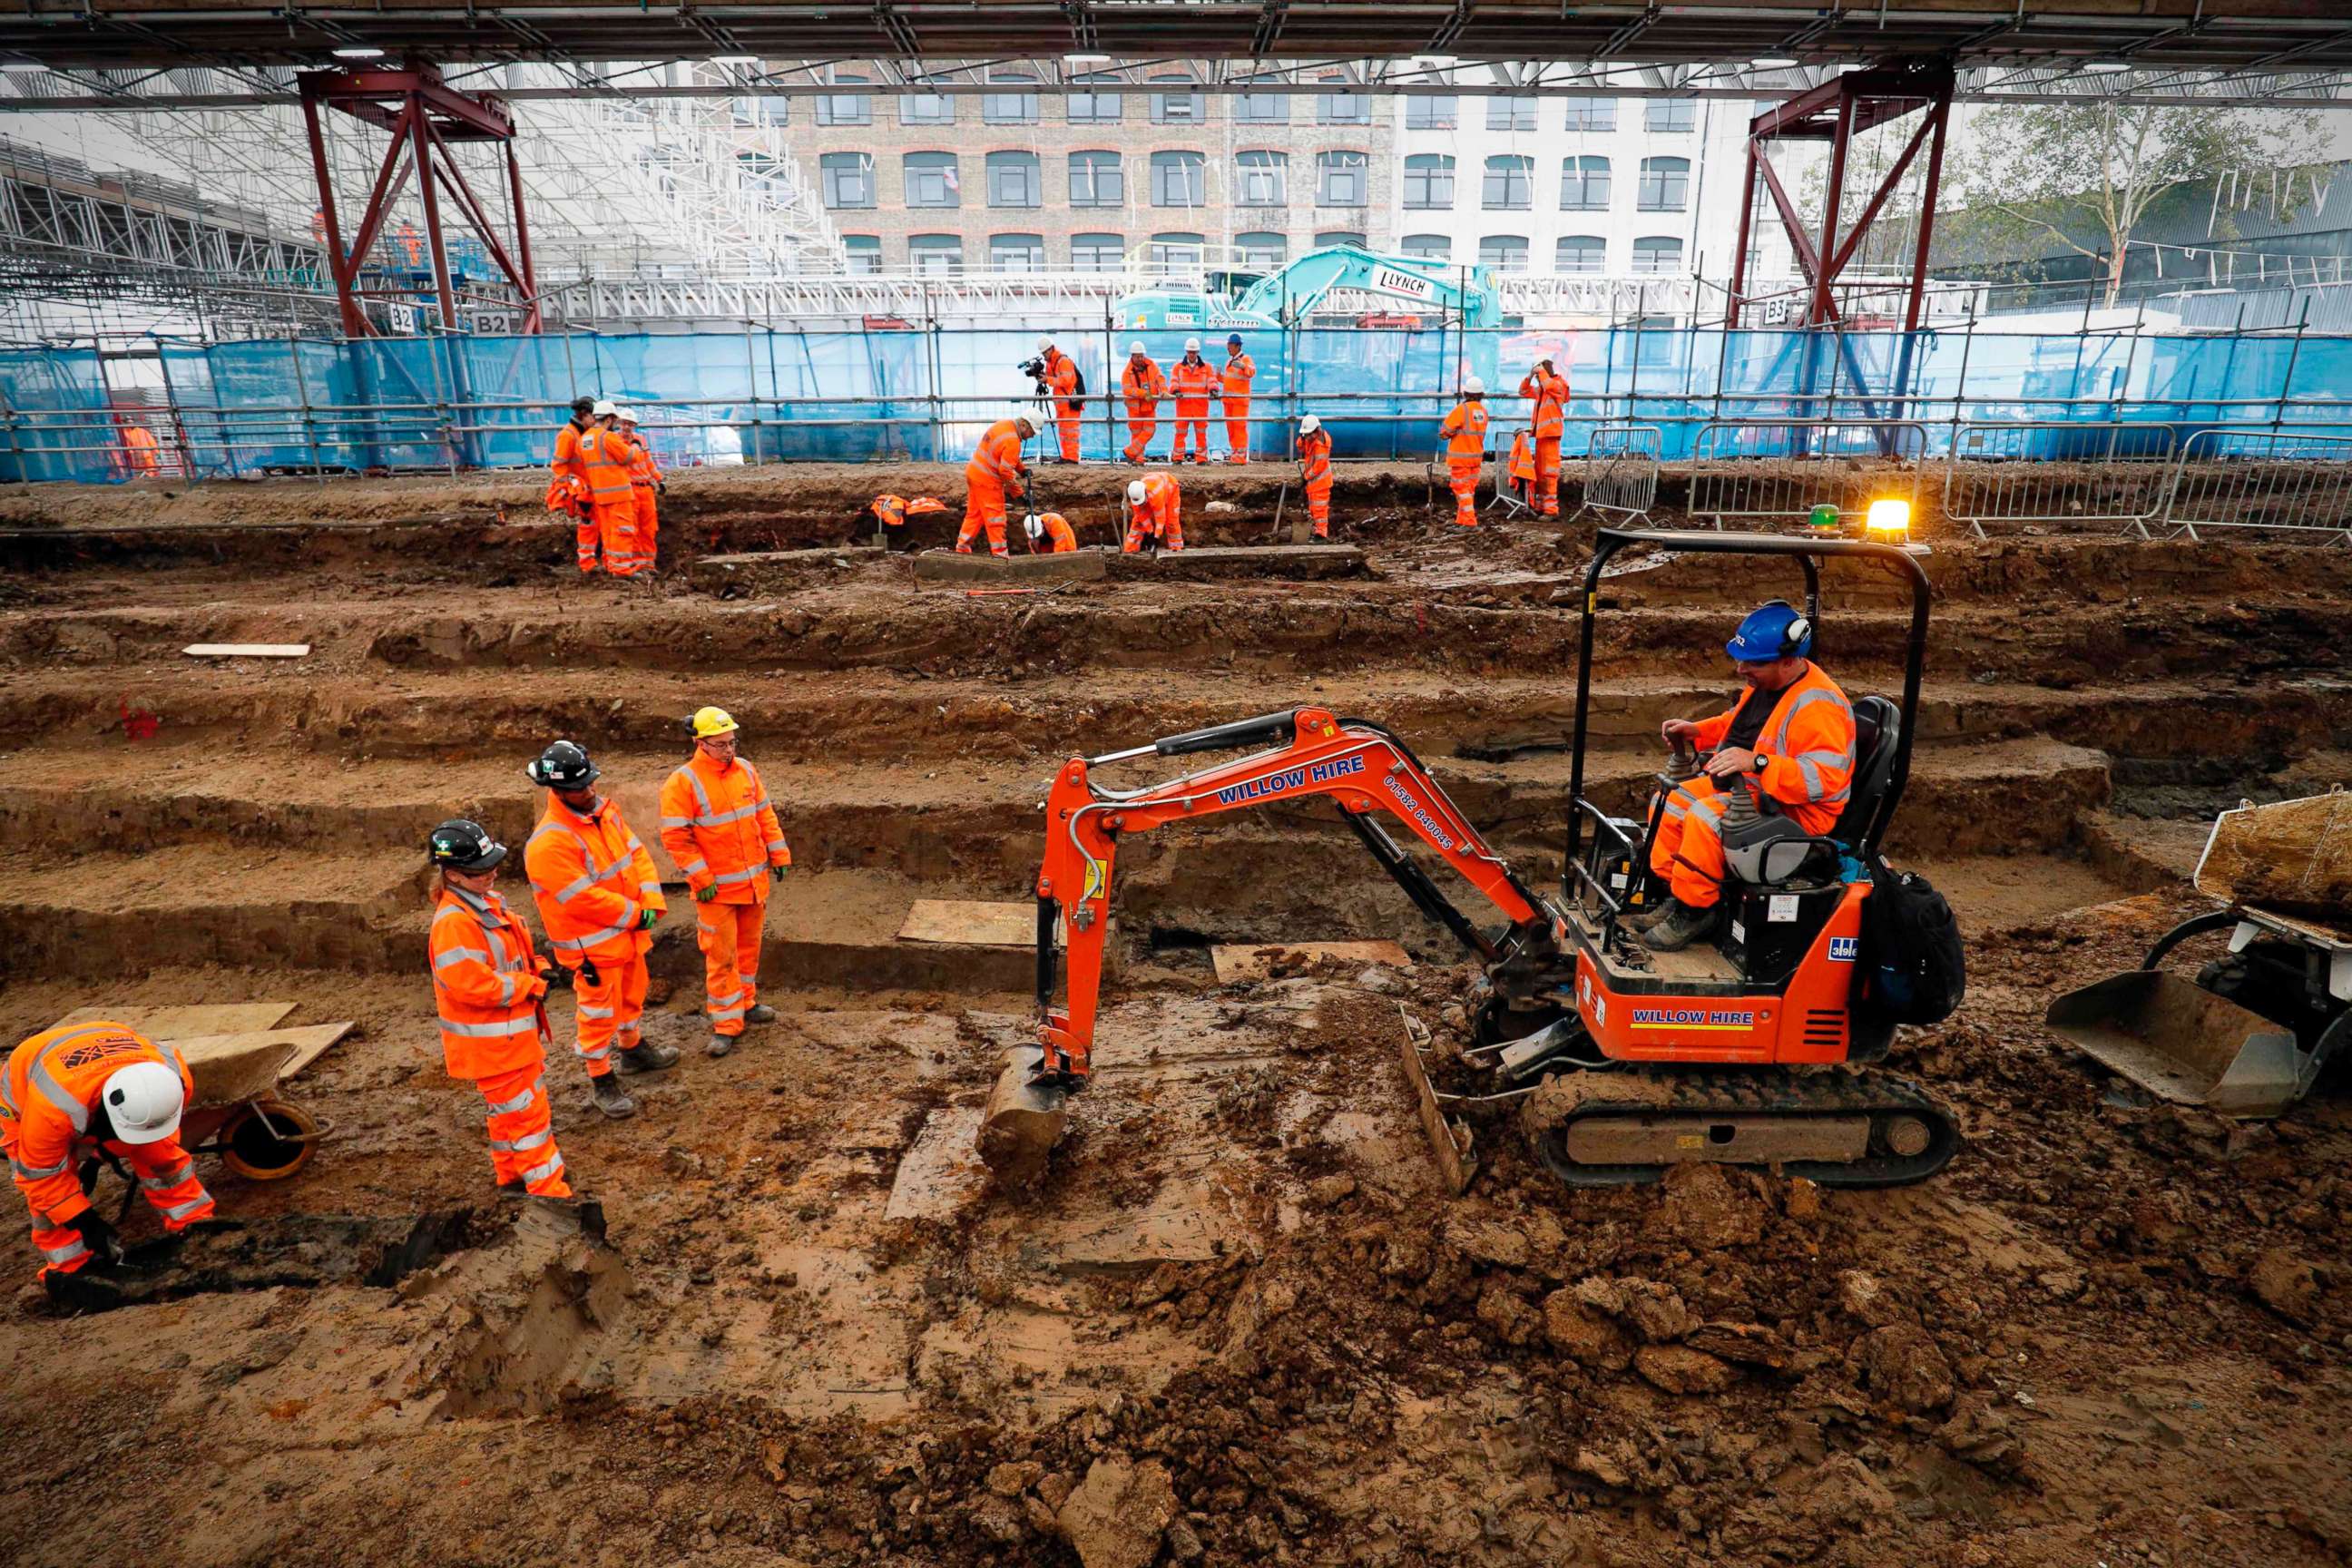 PHOTO: Field archaeologists excavate a late 18th to mid 19th century cemetery under St James Gardens near Euston train station in London, Nov. 1, 2018, as part of the HS2 high-speed rail project.